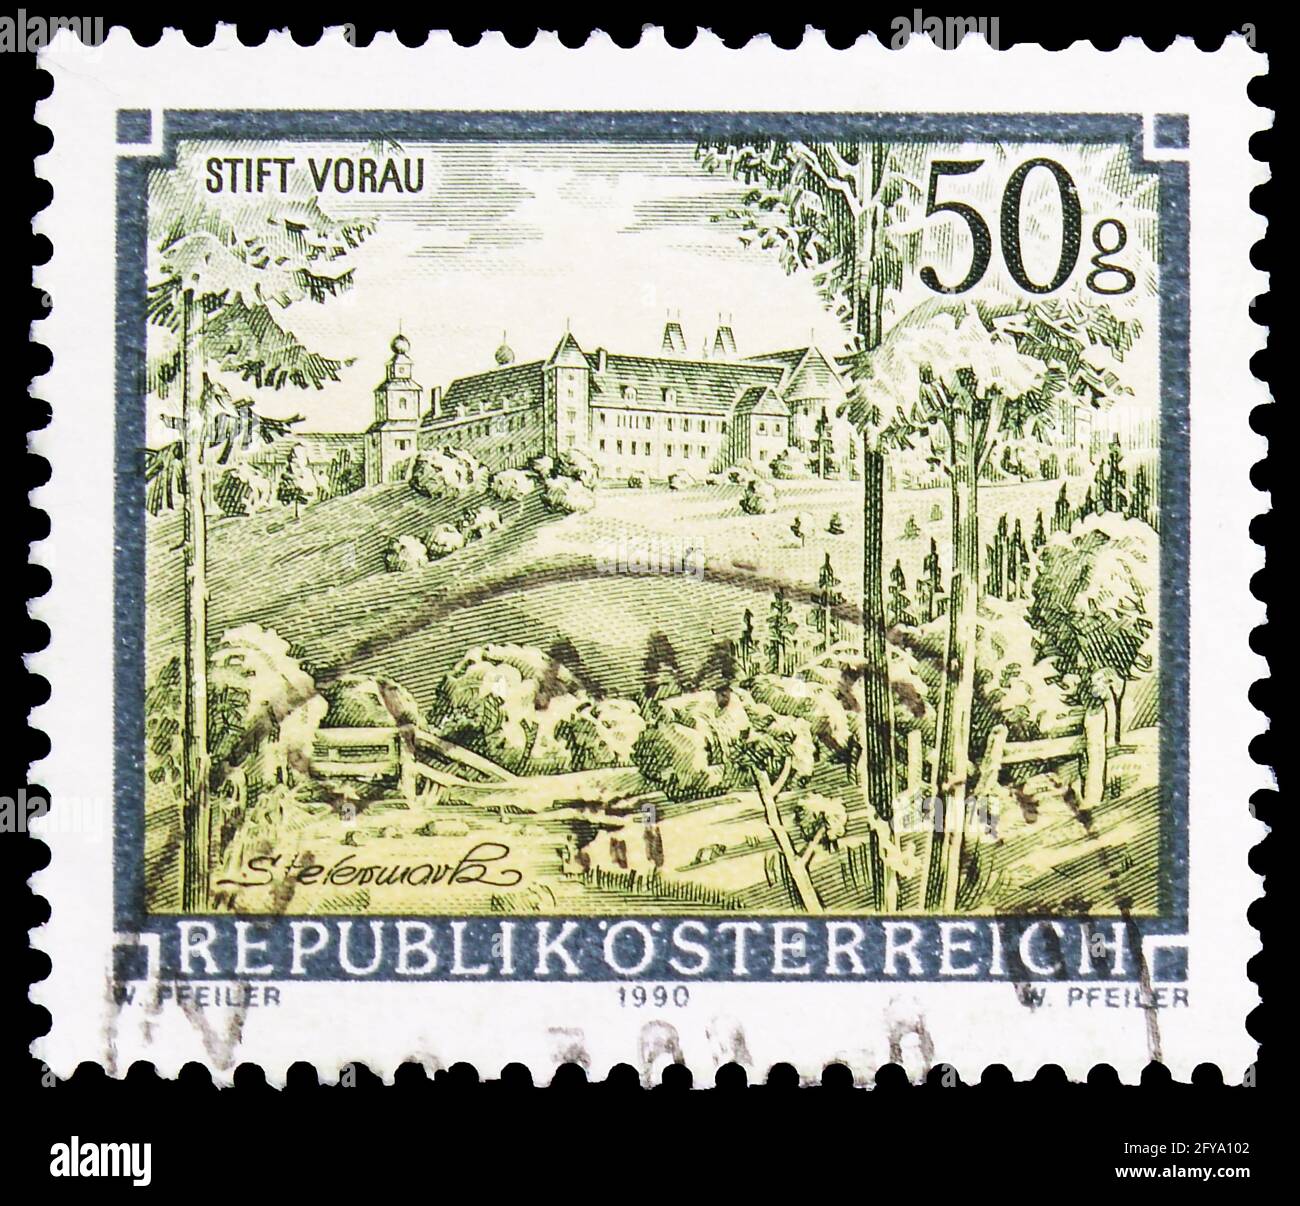 MOSCOW, RUSSIA - SEPTEMBER 23, 2019: Postage stamp printed in Austria shows Augustinian monastery Vorau, Monasteries and Abbeys serie, circa 1990 Stock Photo